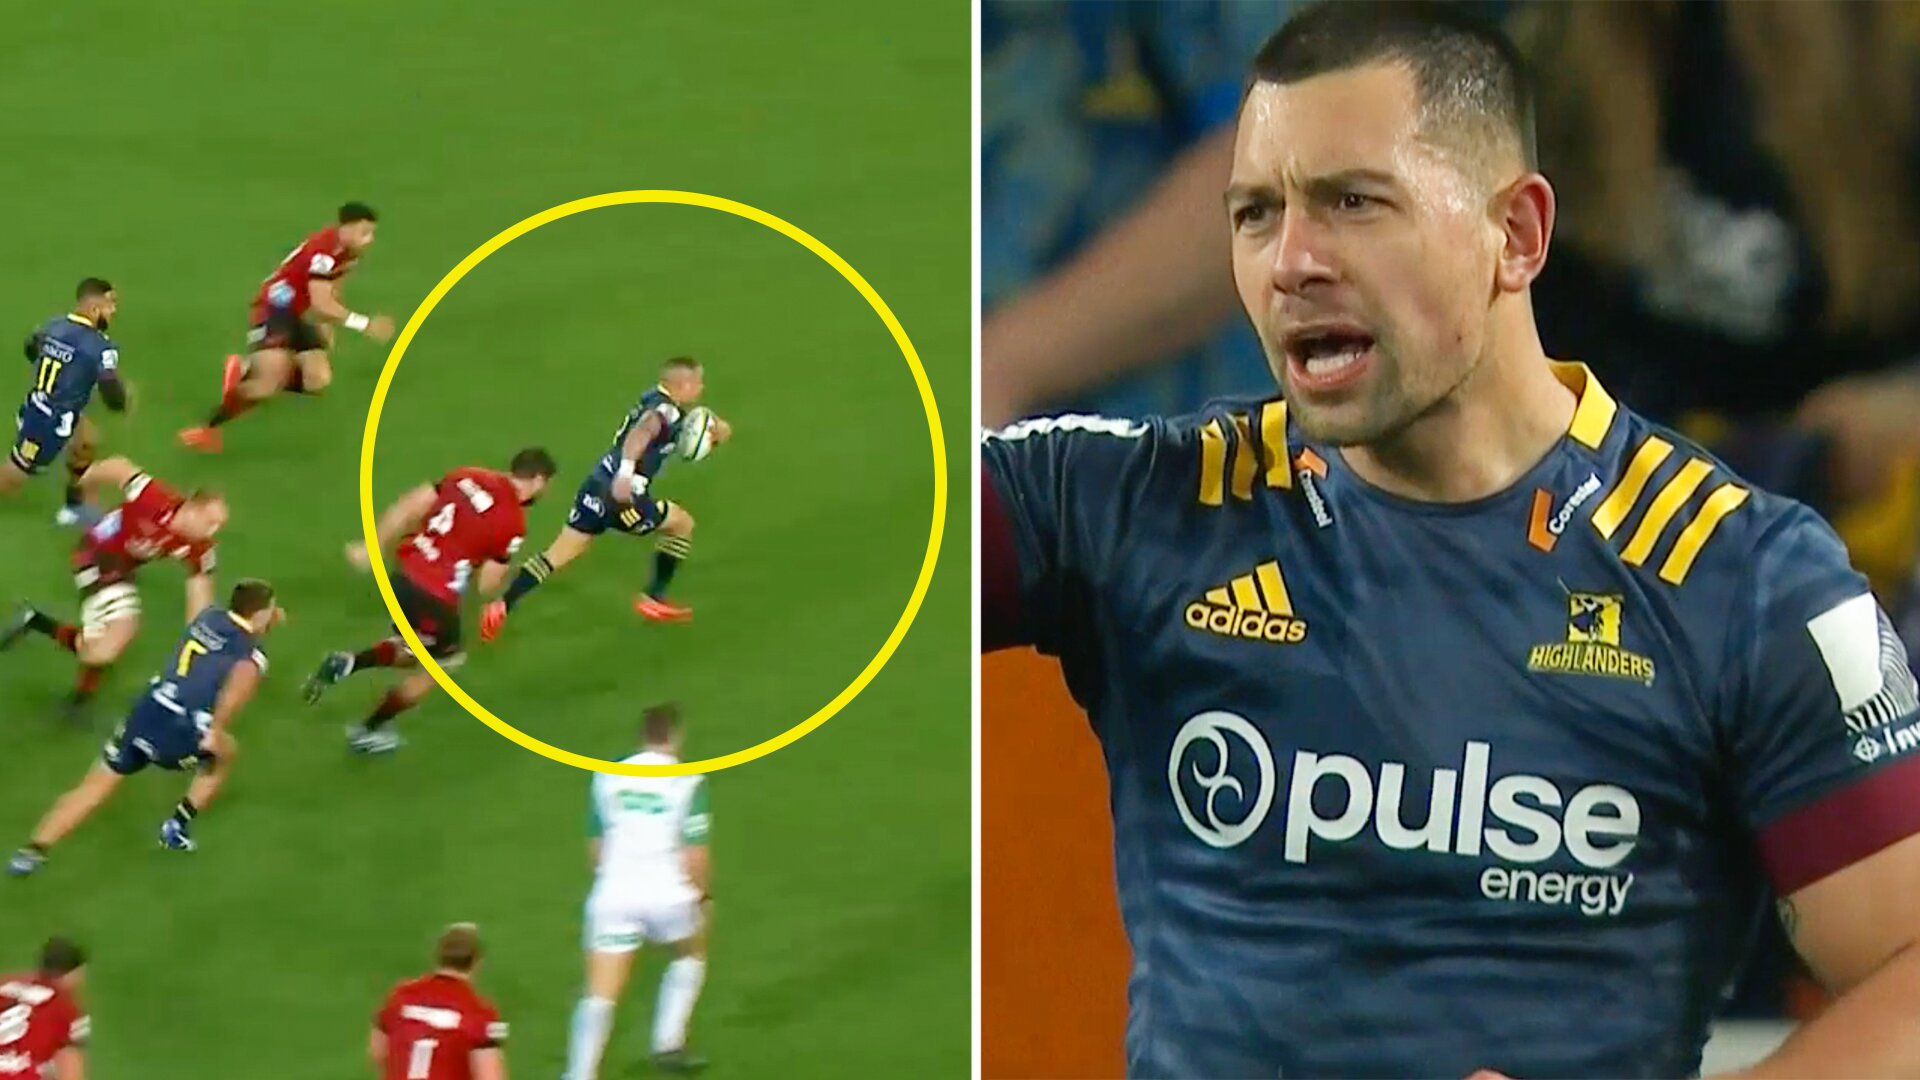 Everyone missed this controversial moment in today's Super Rugby thriller